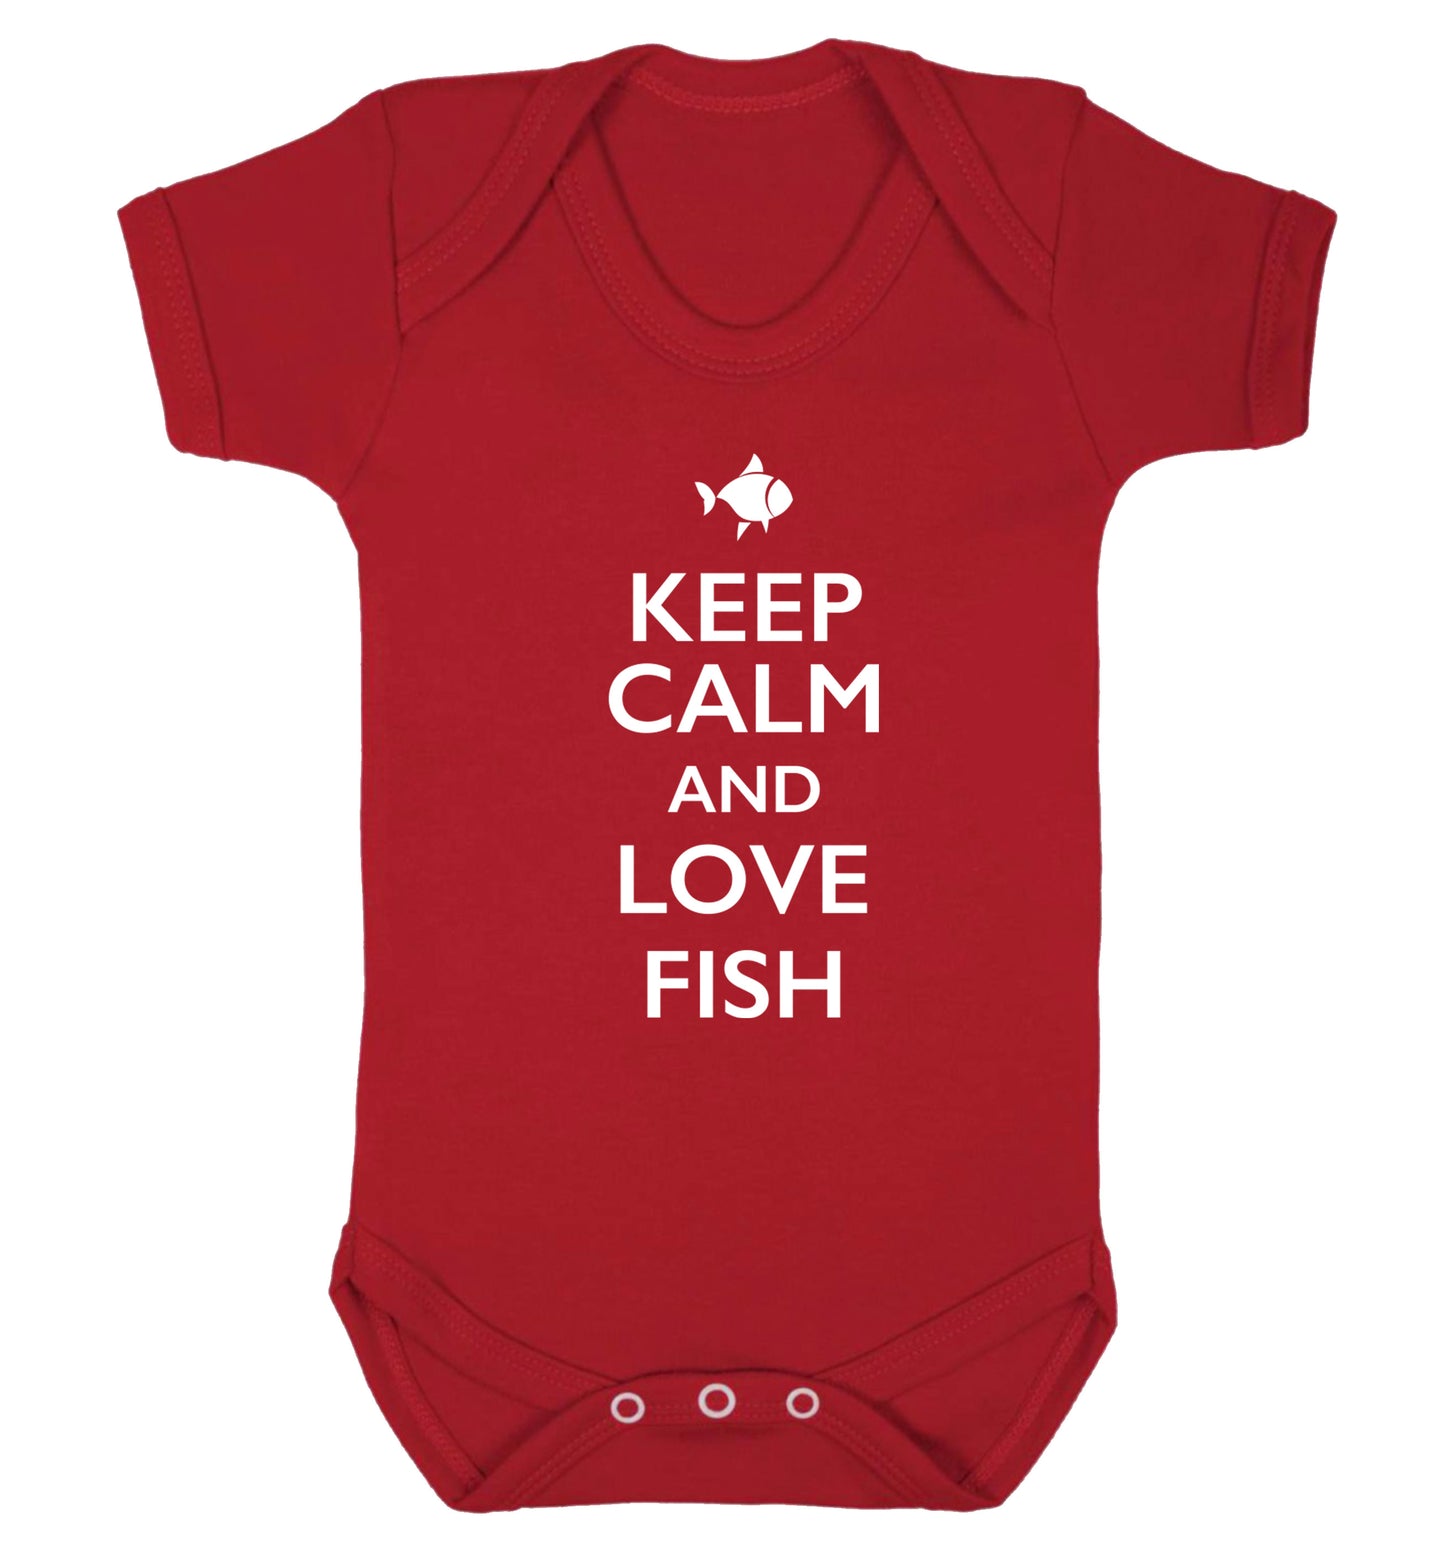 Keep calm and love fish Baby Vest red 18-24 months